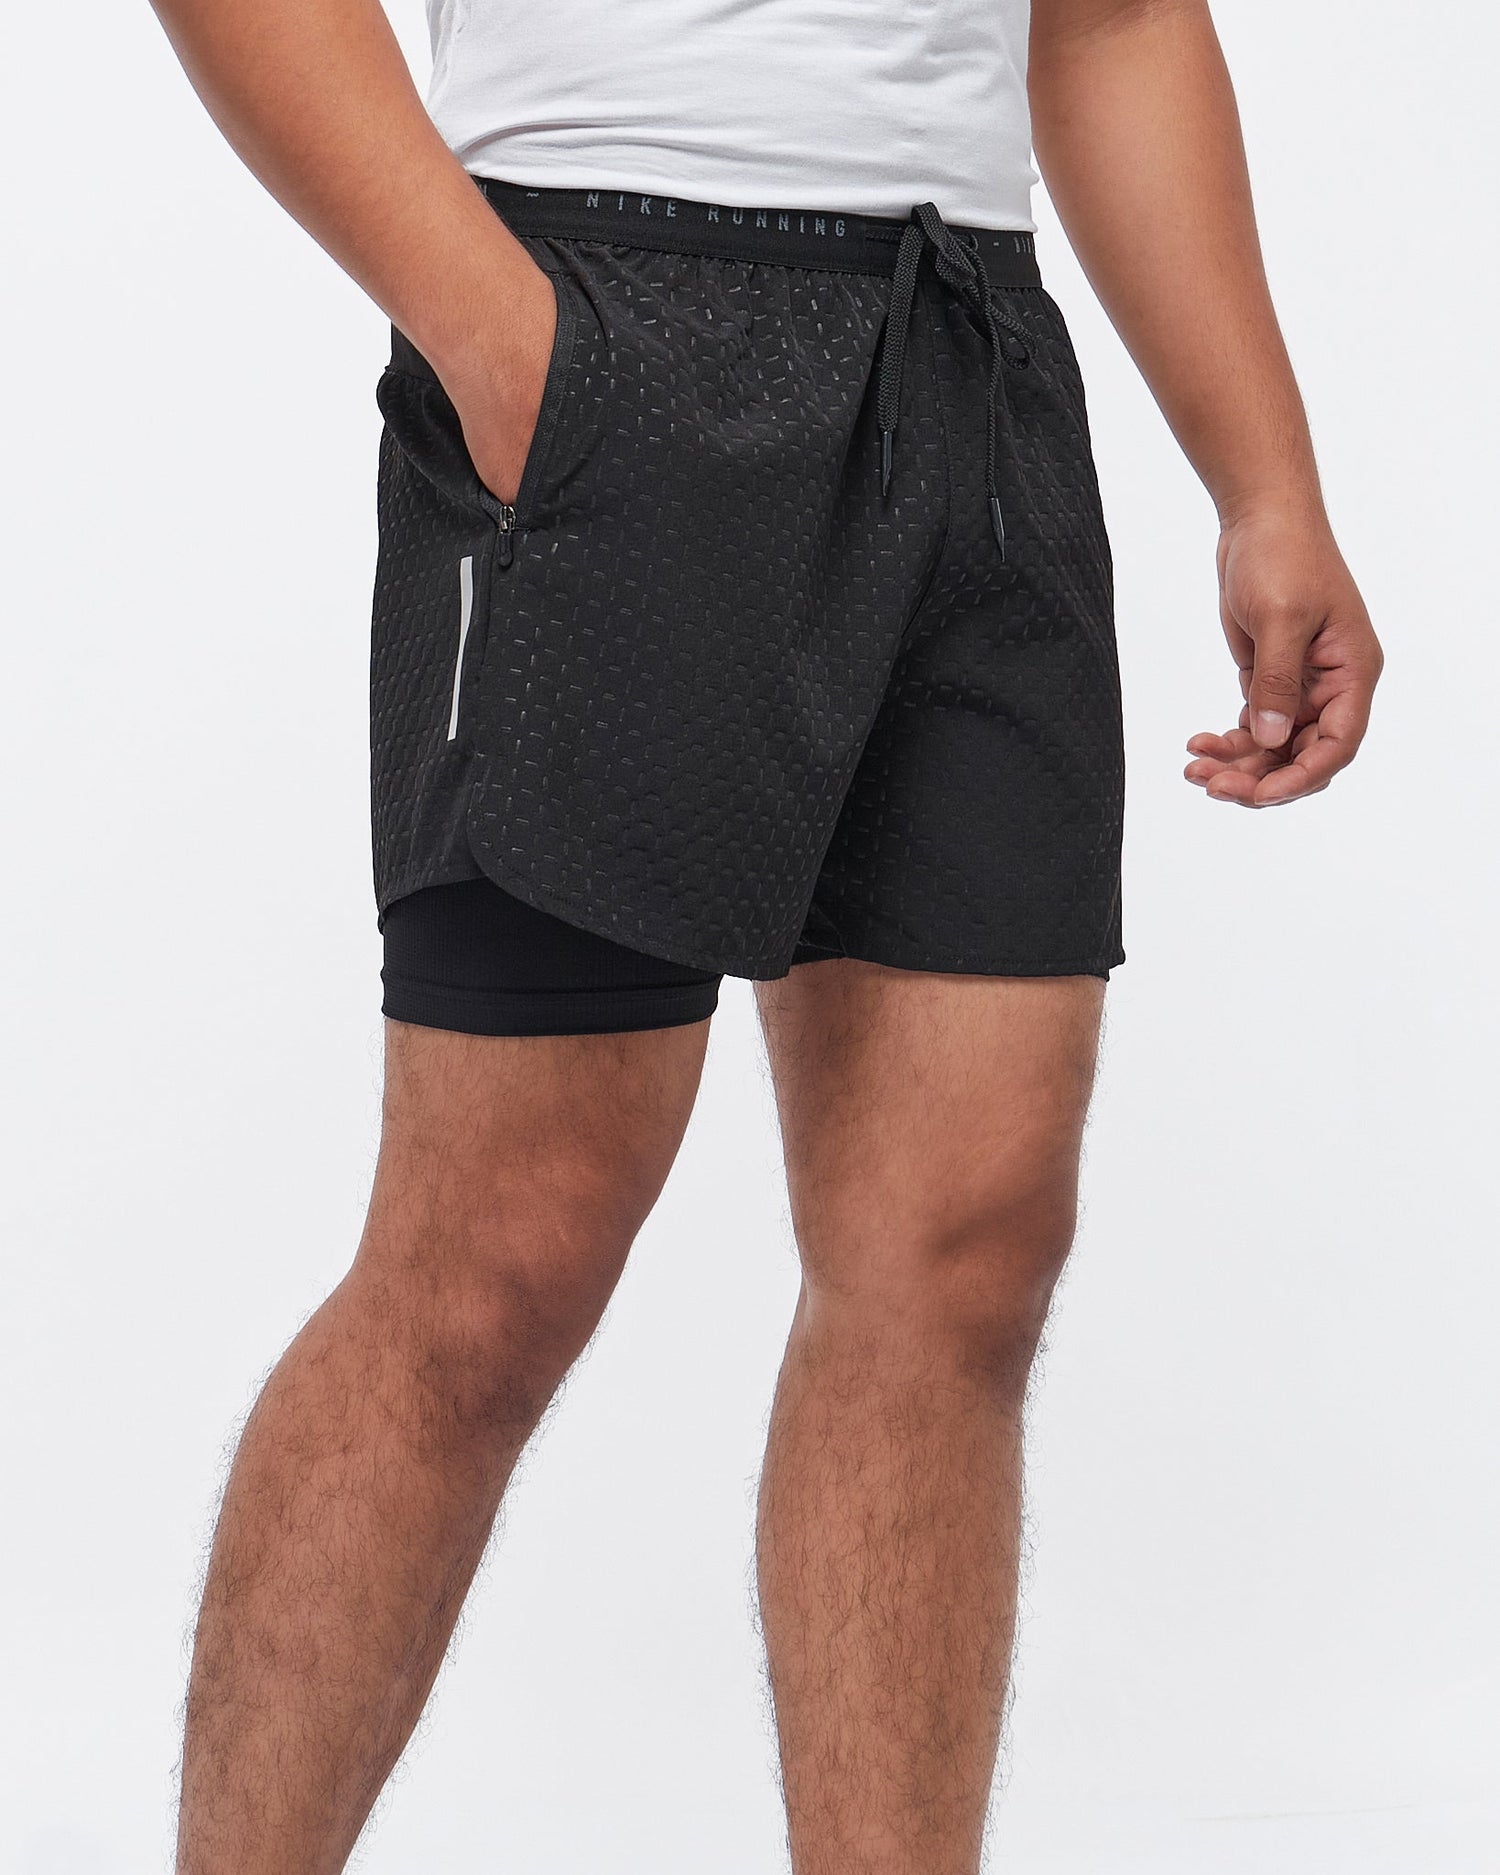 MOI OUTFIT-Running 2 in 1 Men Sport Shorts 14.50